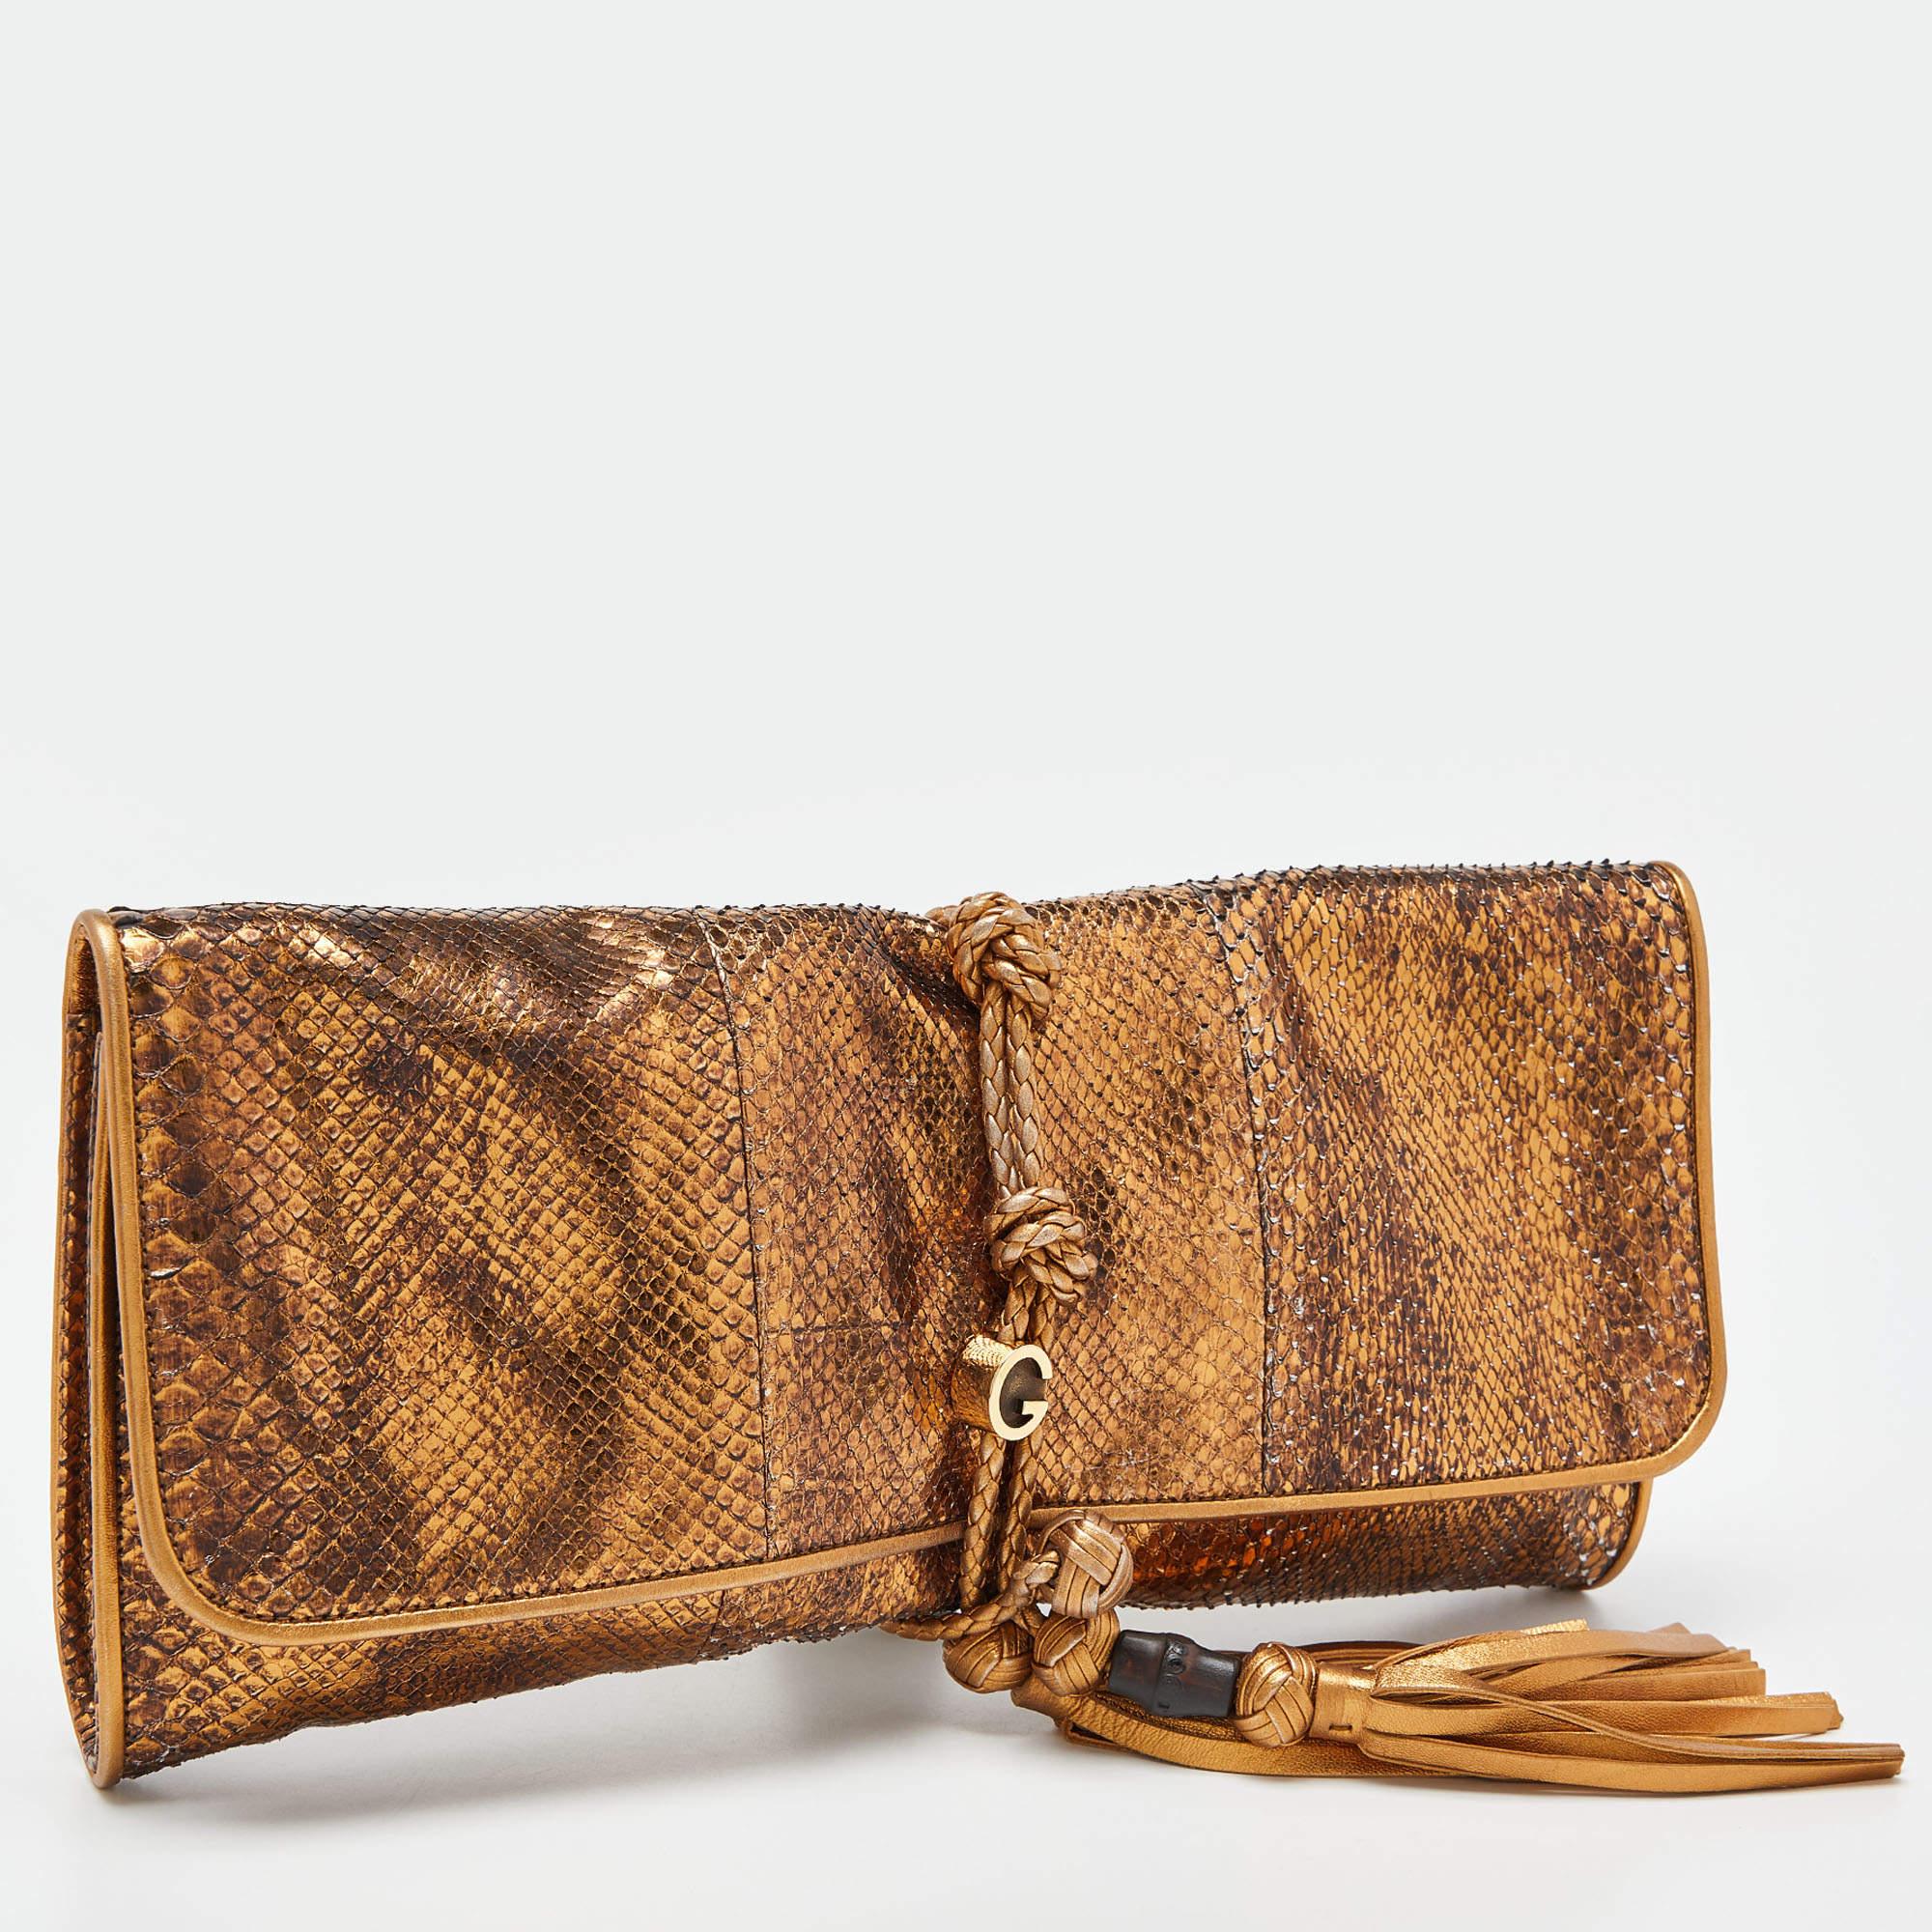 Just right for conveniently storing your valuables without weighing your look down, this Gucci clutch features a python leather exterior with braided strings and a bamboo accent. Carry it in hand as a stylish evening accessory.

